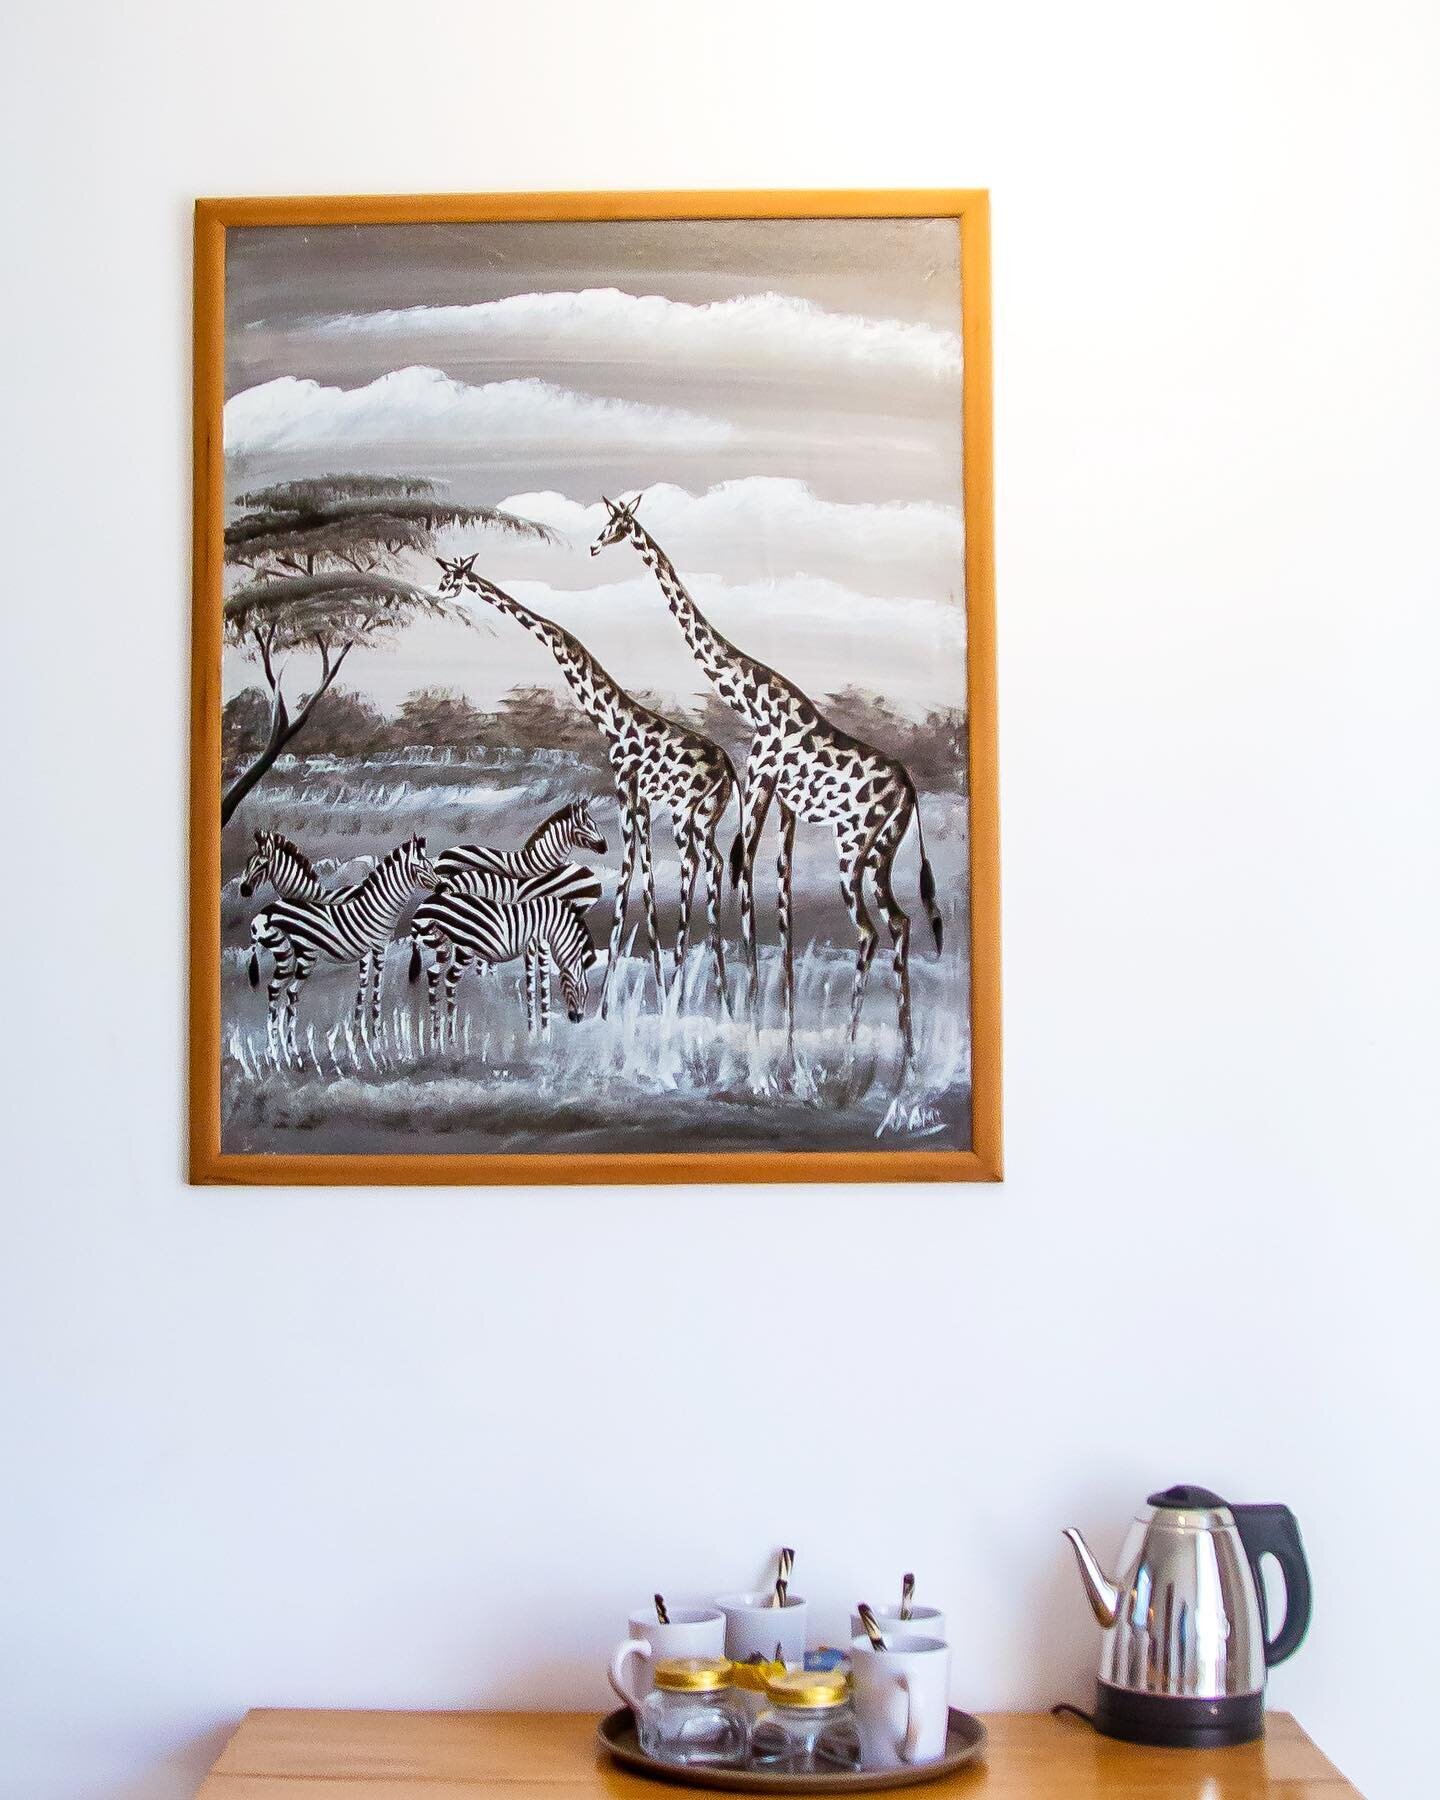 Traditional African art in the Family Room 🦓

The blend of these traditional pieces with our modern furniture is what makes our hotel so interesting and unique!

#thesafarihouse #decor #traditionalafricanart #artwork #familyroom #mixofoldandnew #des